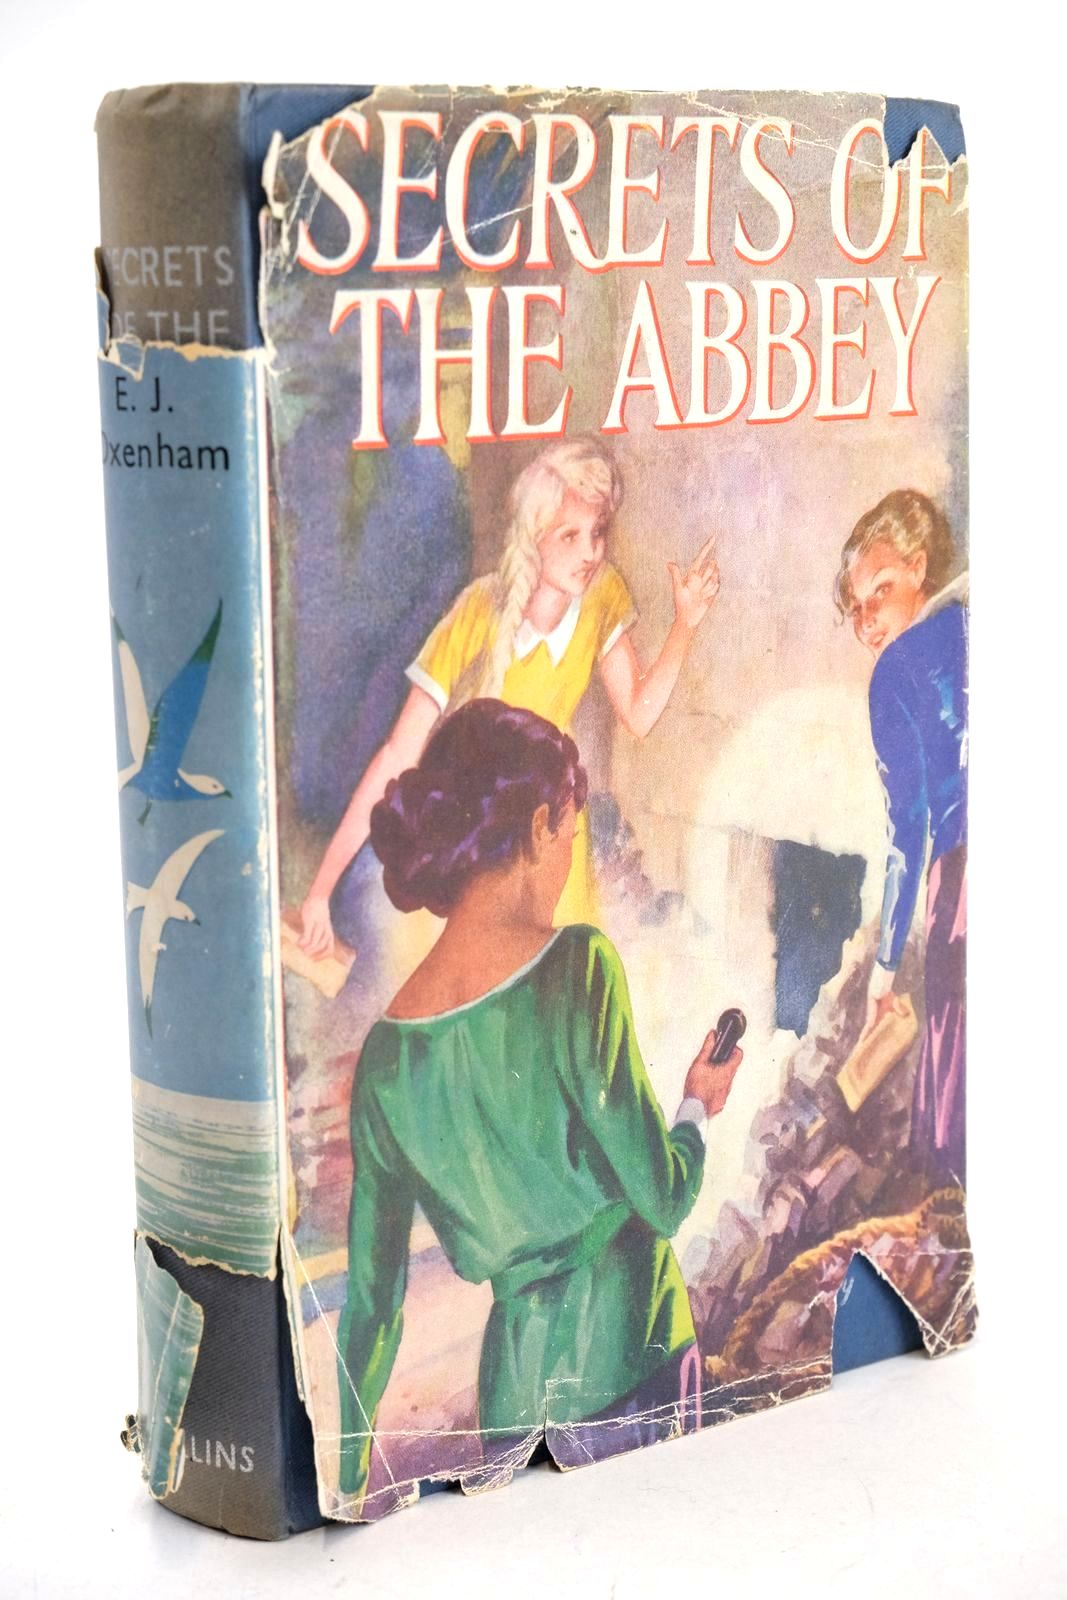 Photo of SECRETS OF THE ABBEY written by Oxenham, Elsie J. published by Collins (STOCK CODE: 1326834)  for sale by Stella & Rose's Books